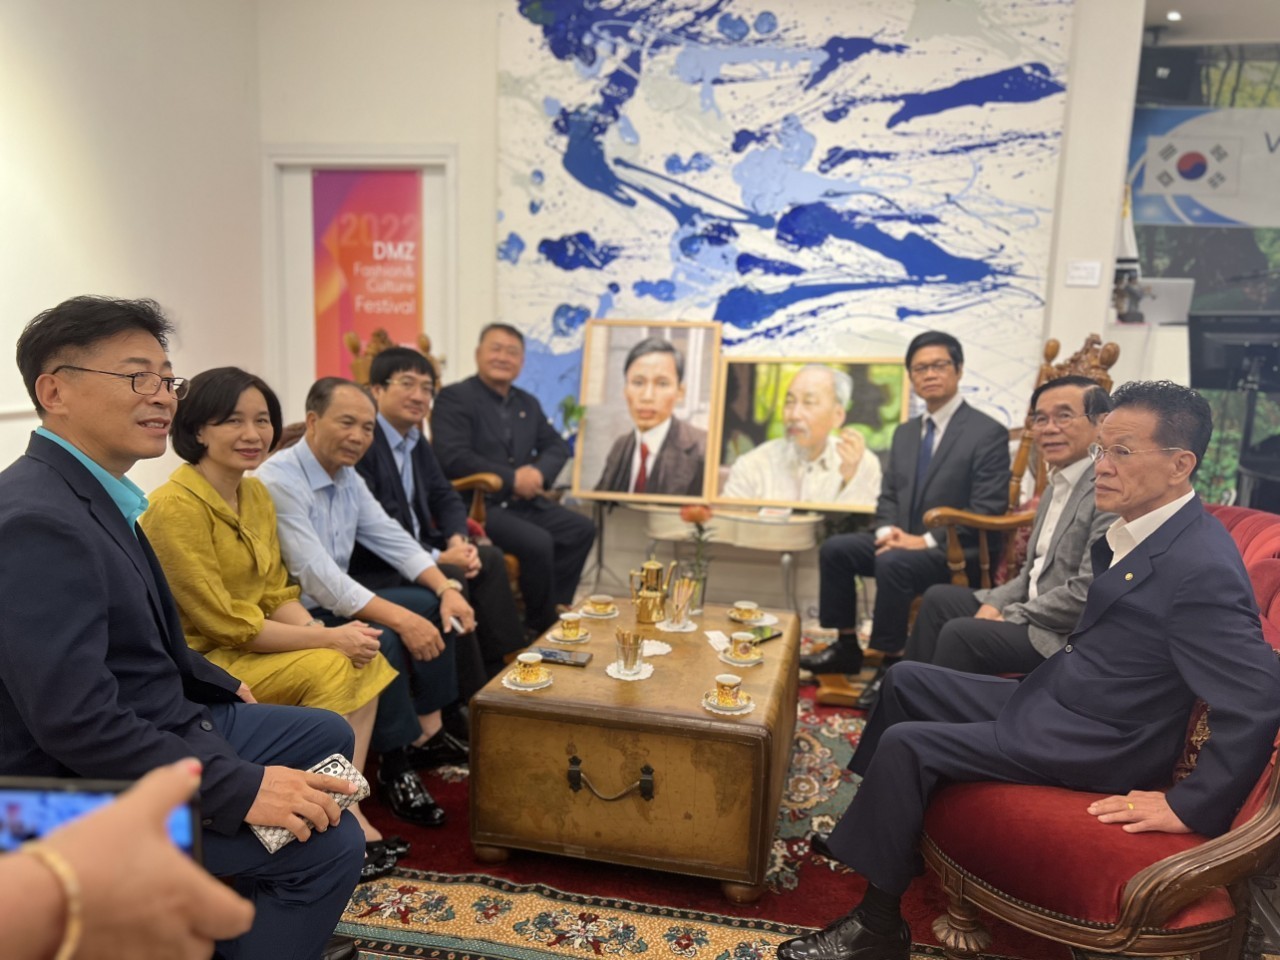 Representatives of the Friendship Association of the two countries next to two portraits of Uncle Ho hand-embroidered by an artisan in Busan (South Korea).